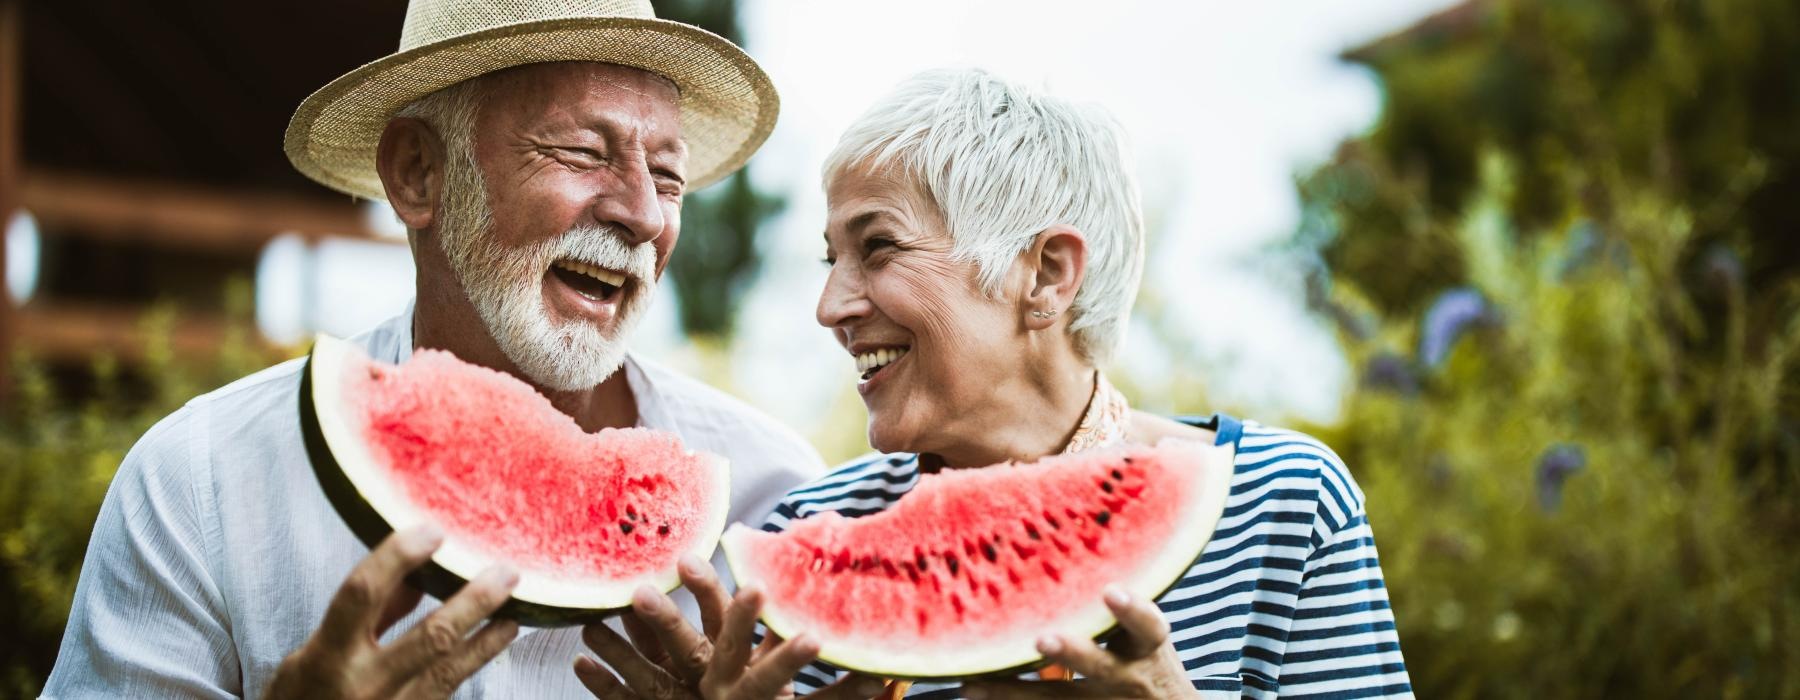 a man and a woman eating watermelon